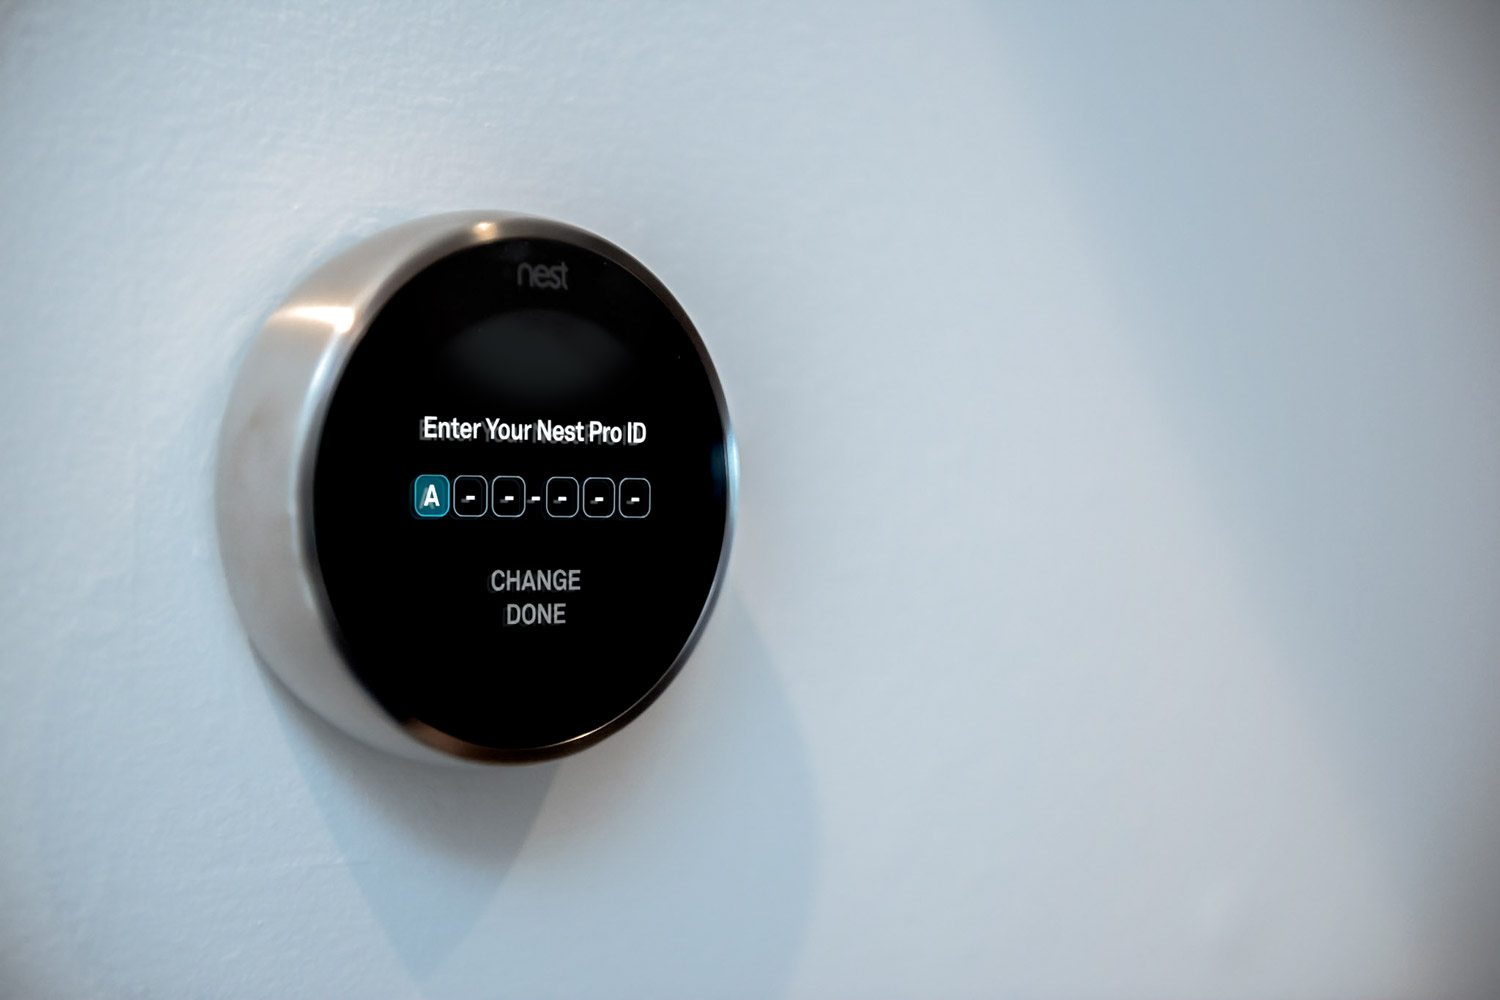 Nest Thermostat IoT-enabled systems